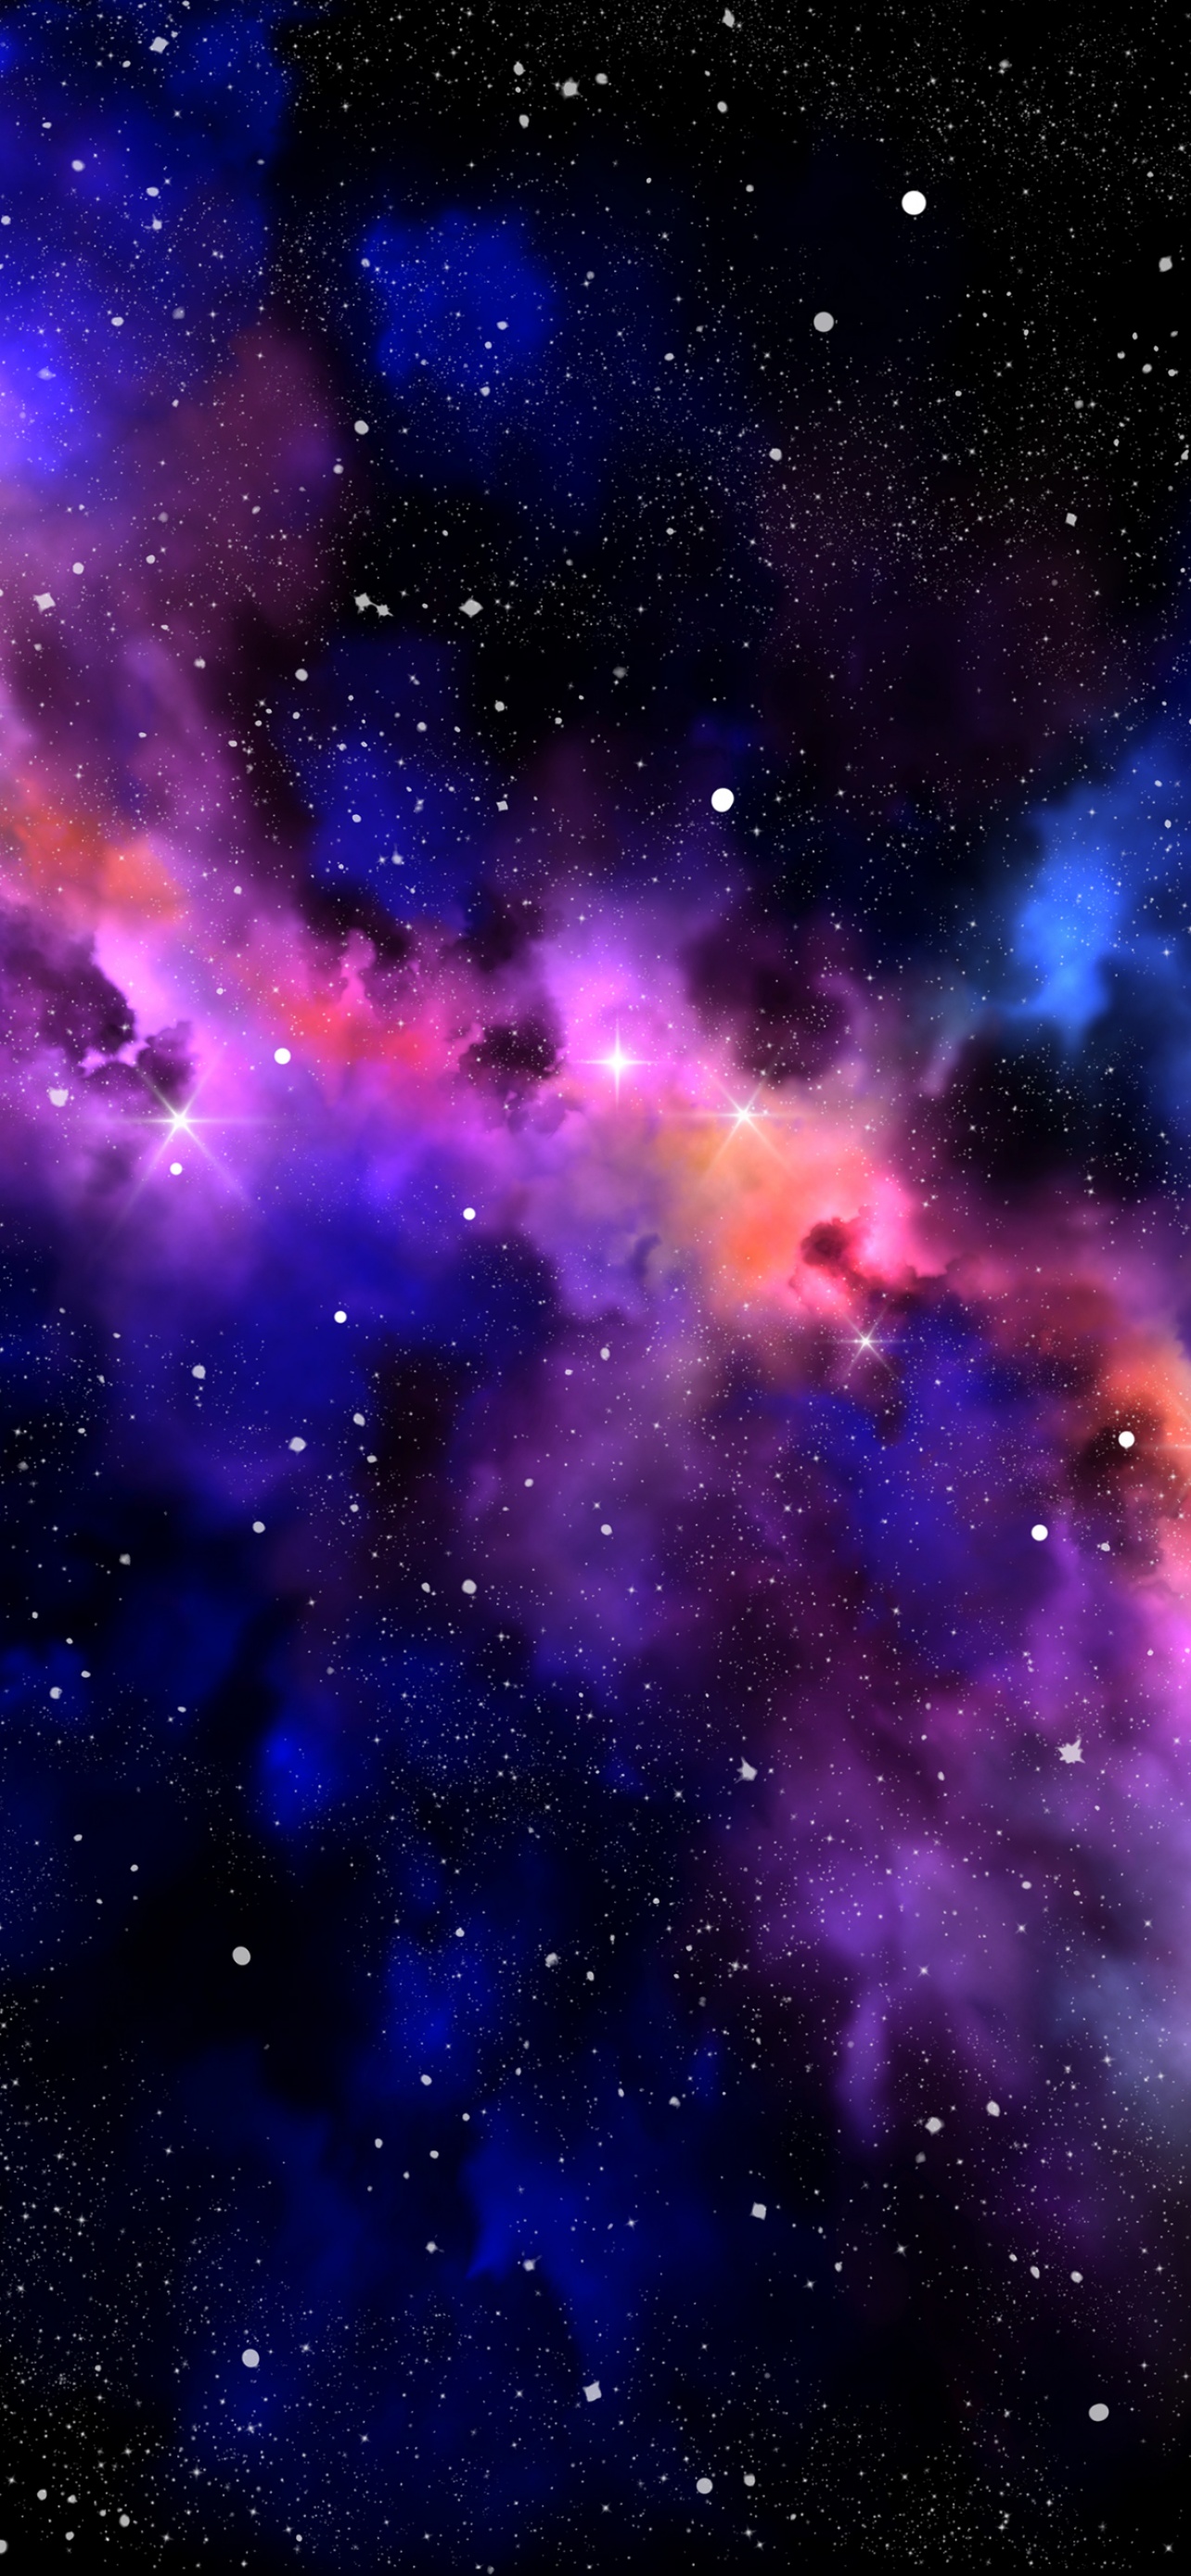 Wallpaper Milky Way Atmosphere Galaxy Star Nature Background   Download Free Image